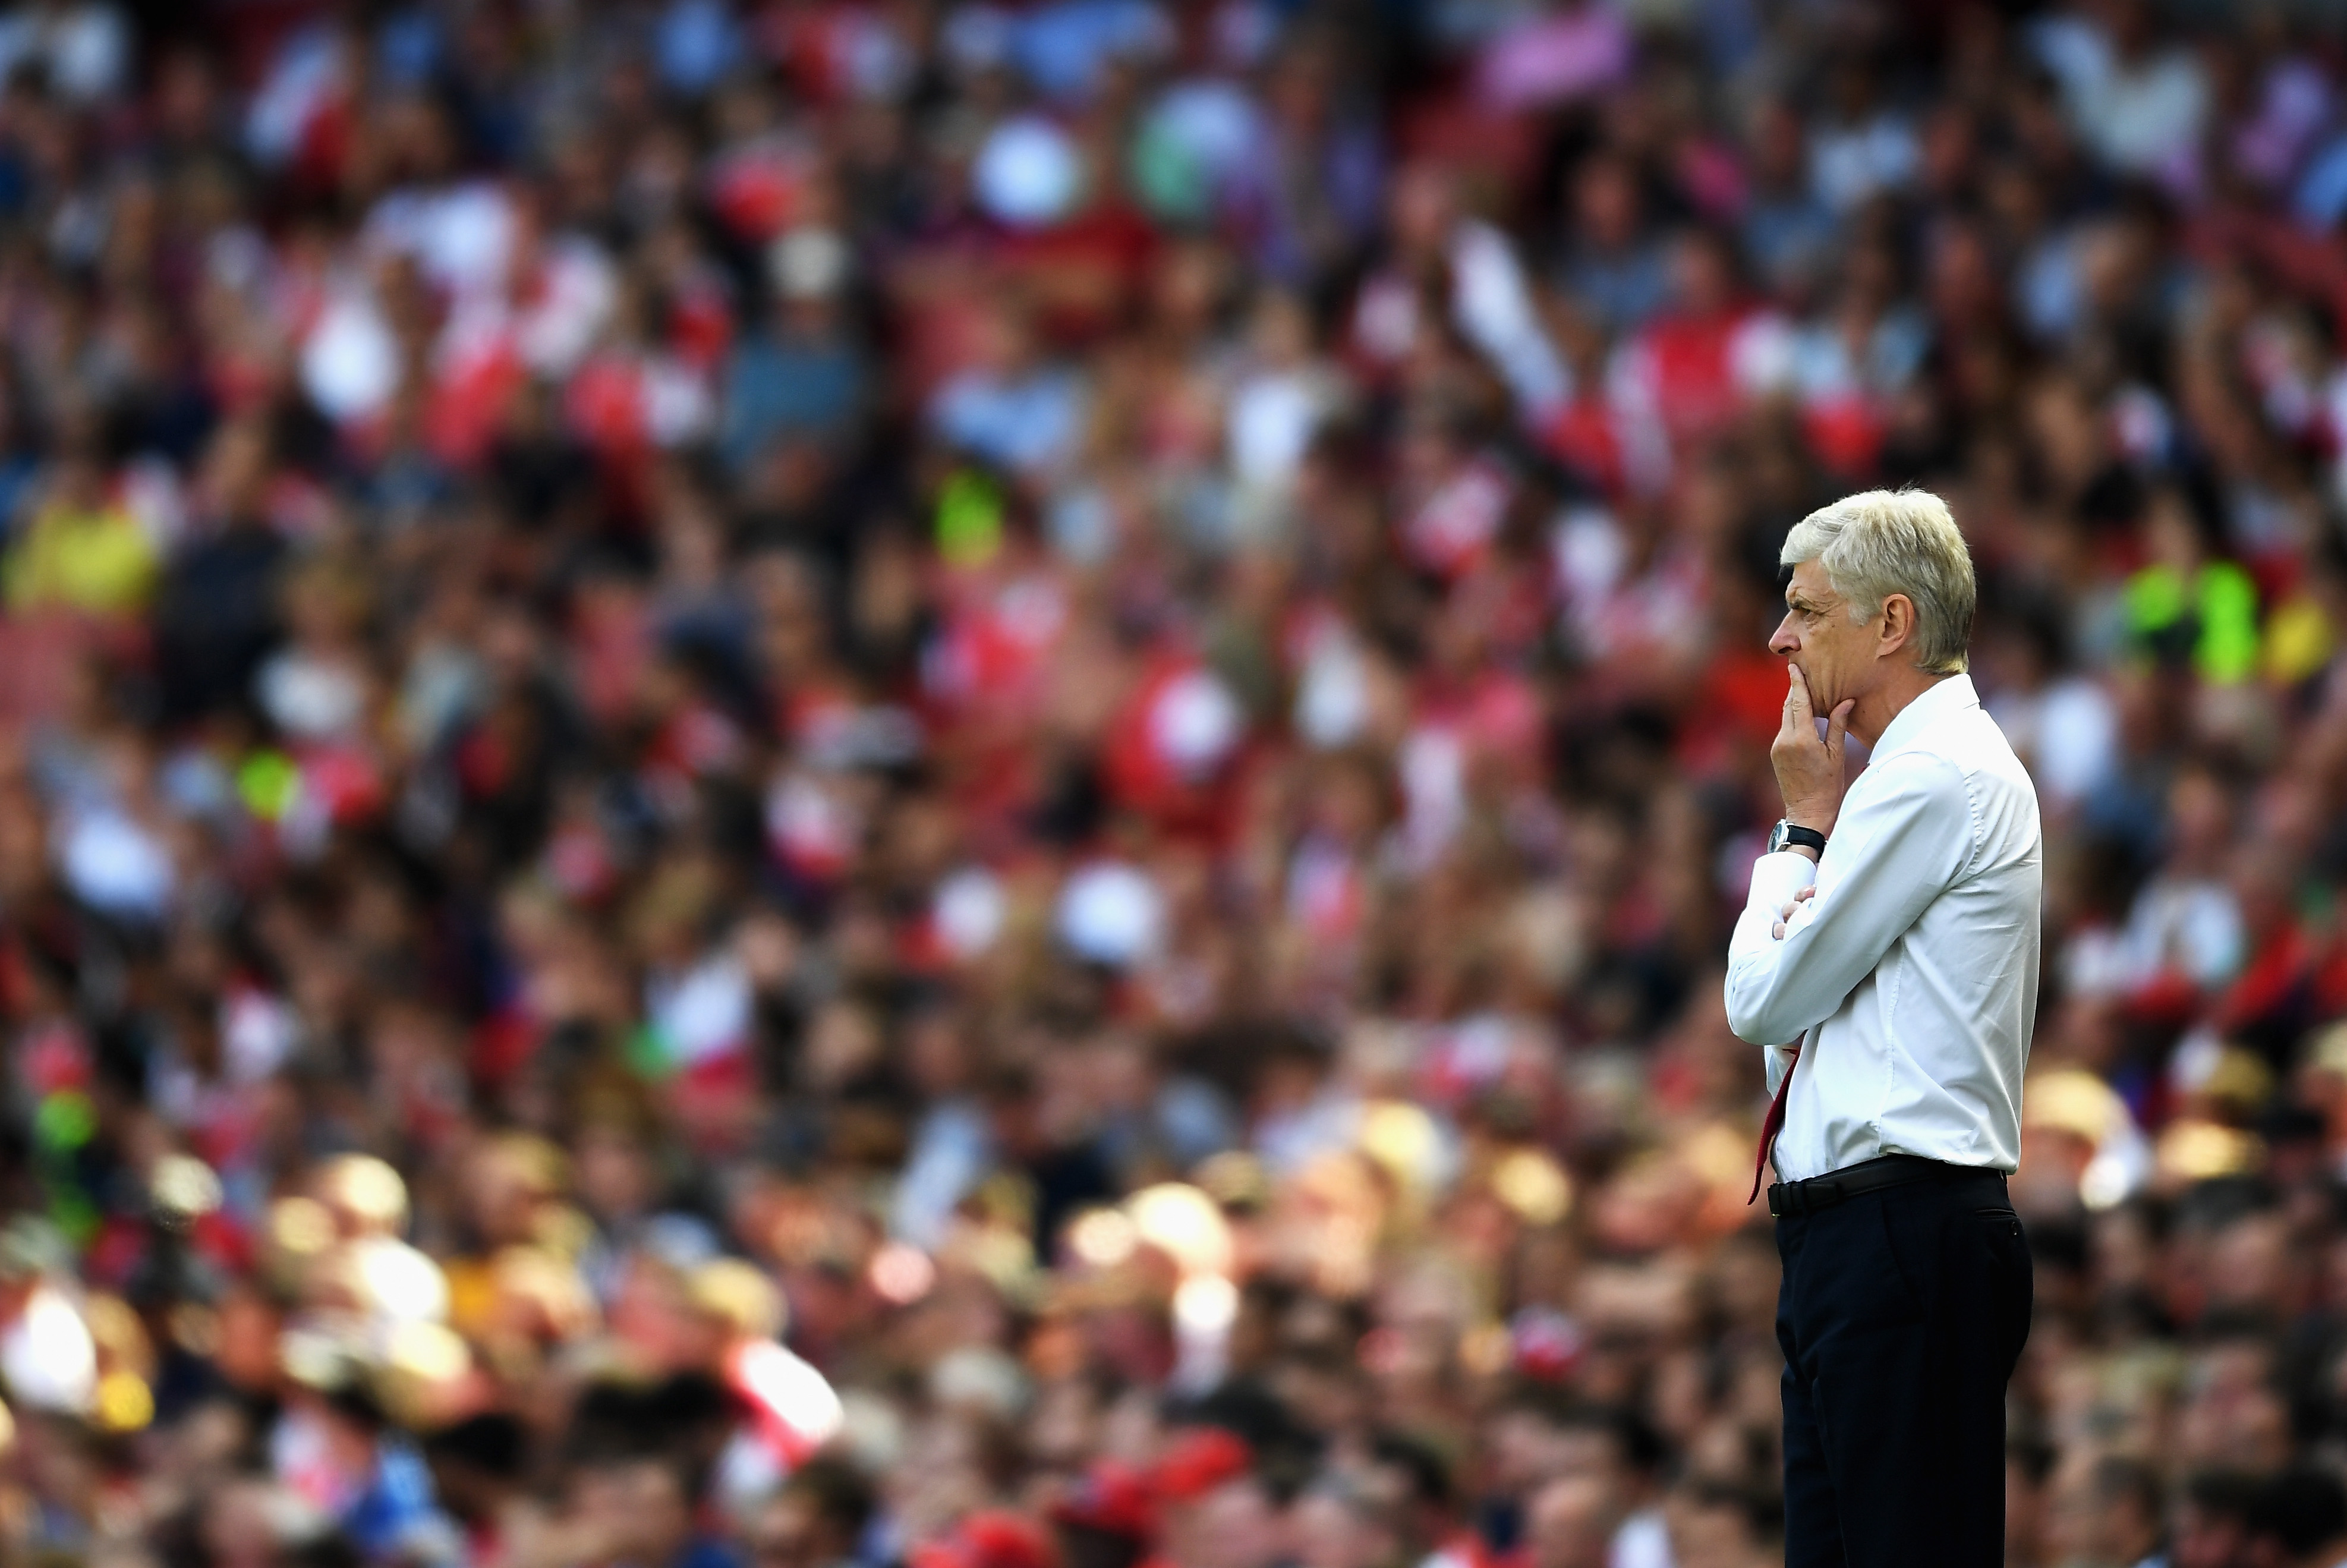 Wenger worried about artificial pitch ahead of Arsenal's FA Cup clash